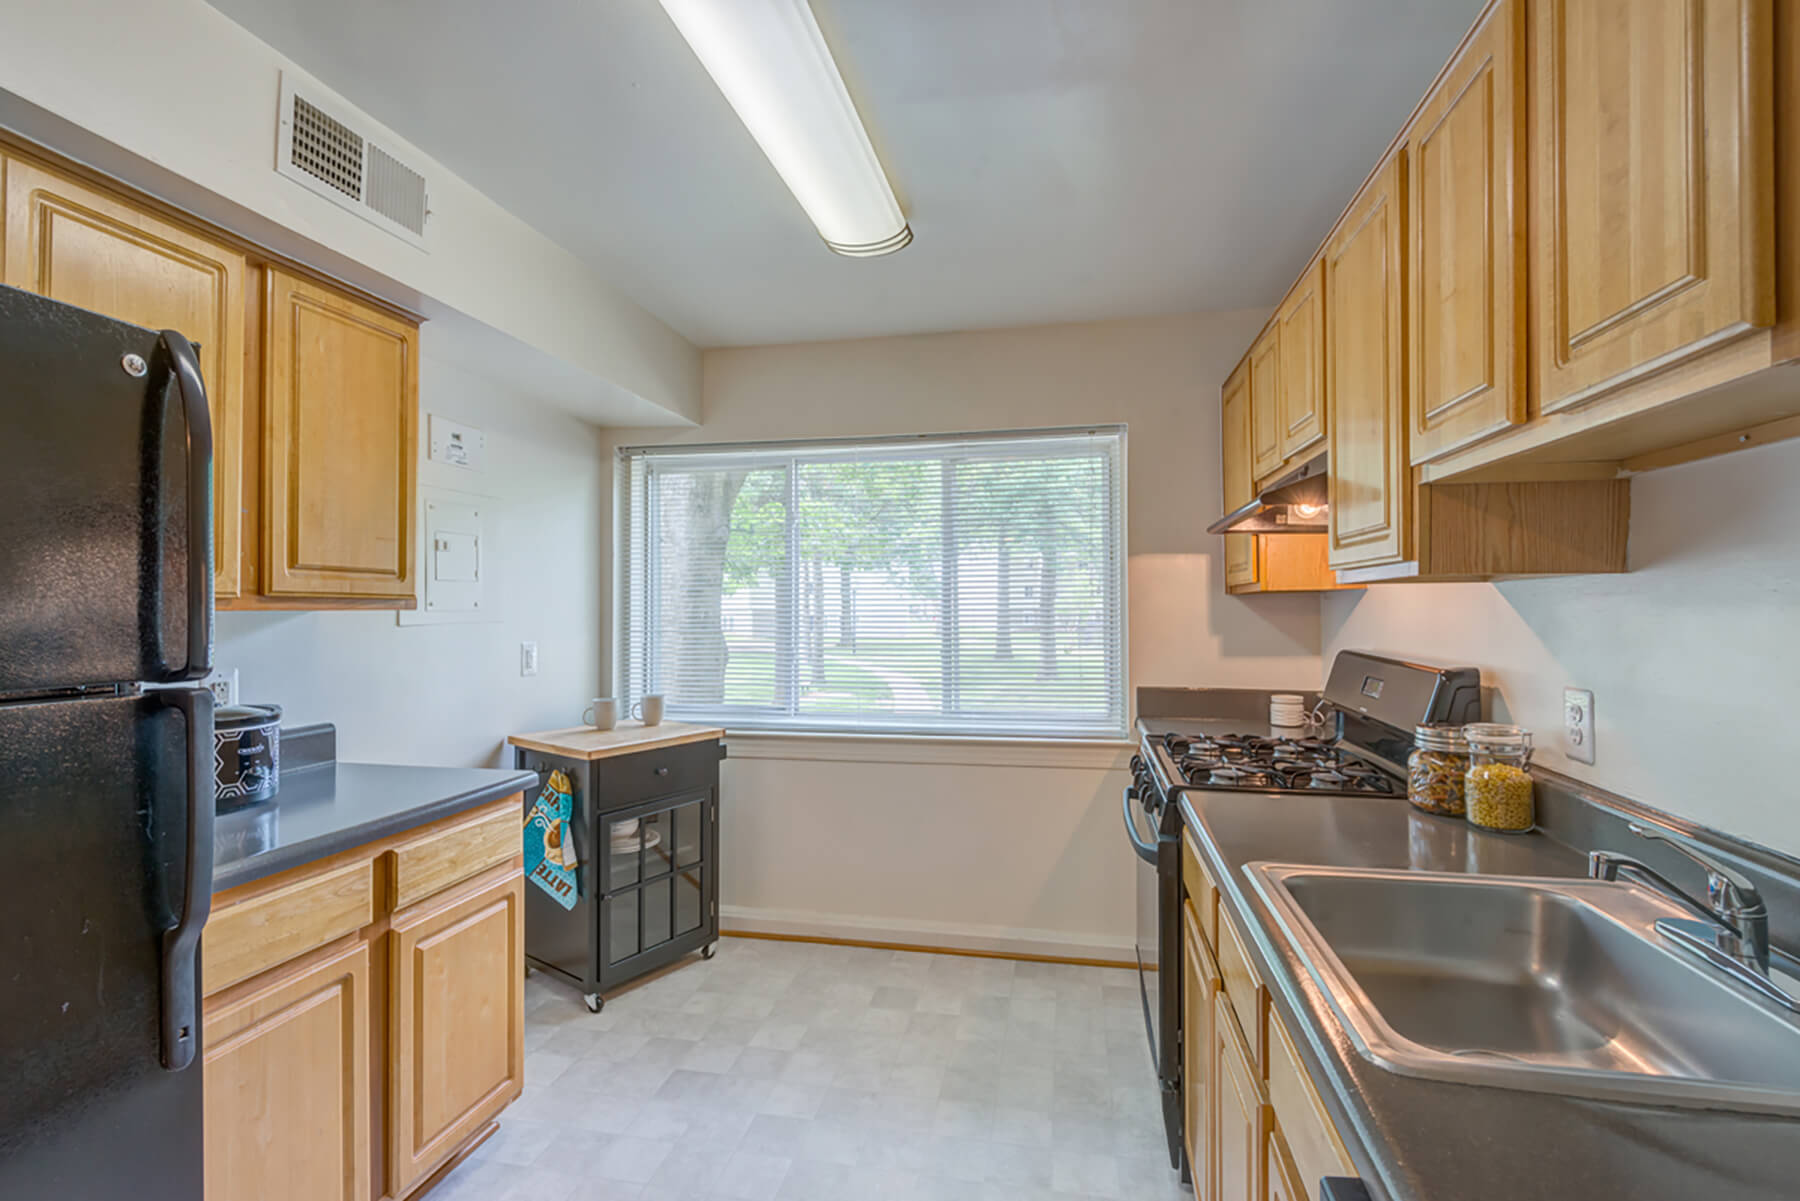 A kitchen with a double sink at the Leesburg Apartments in Leesburg, Virginia.